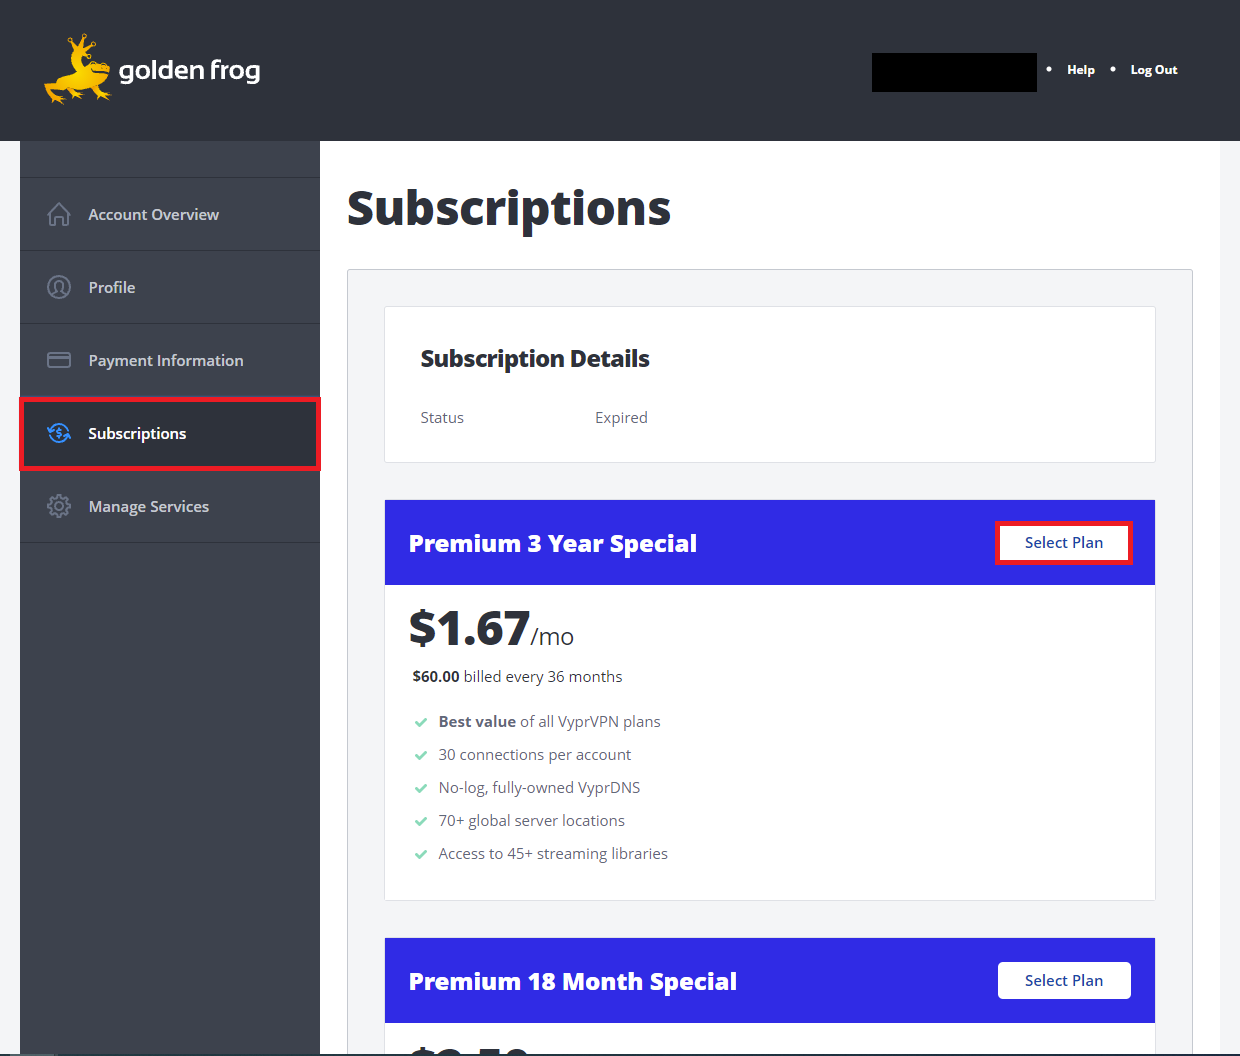 Subscriptions_Tab _-_ Subscriptions_and_Select_Plan_Highlights.png